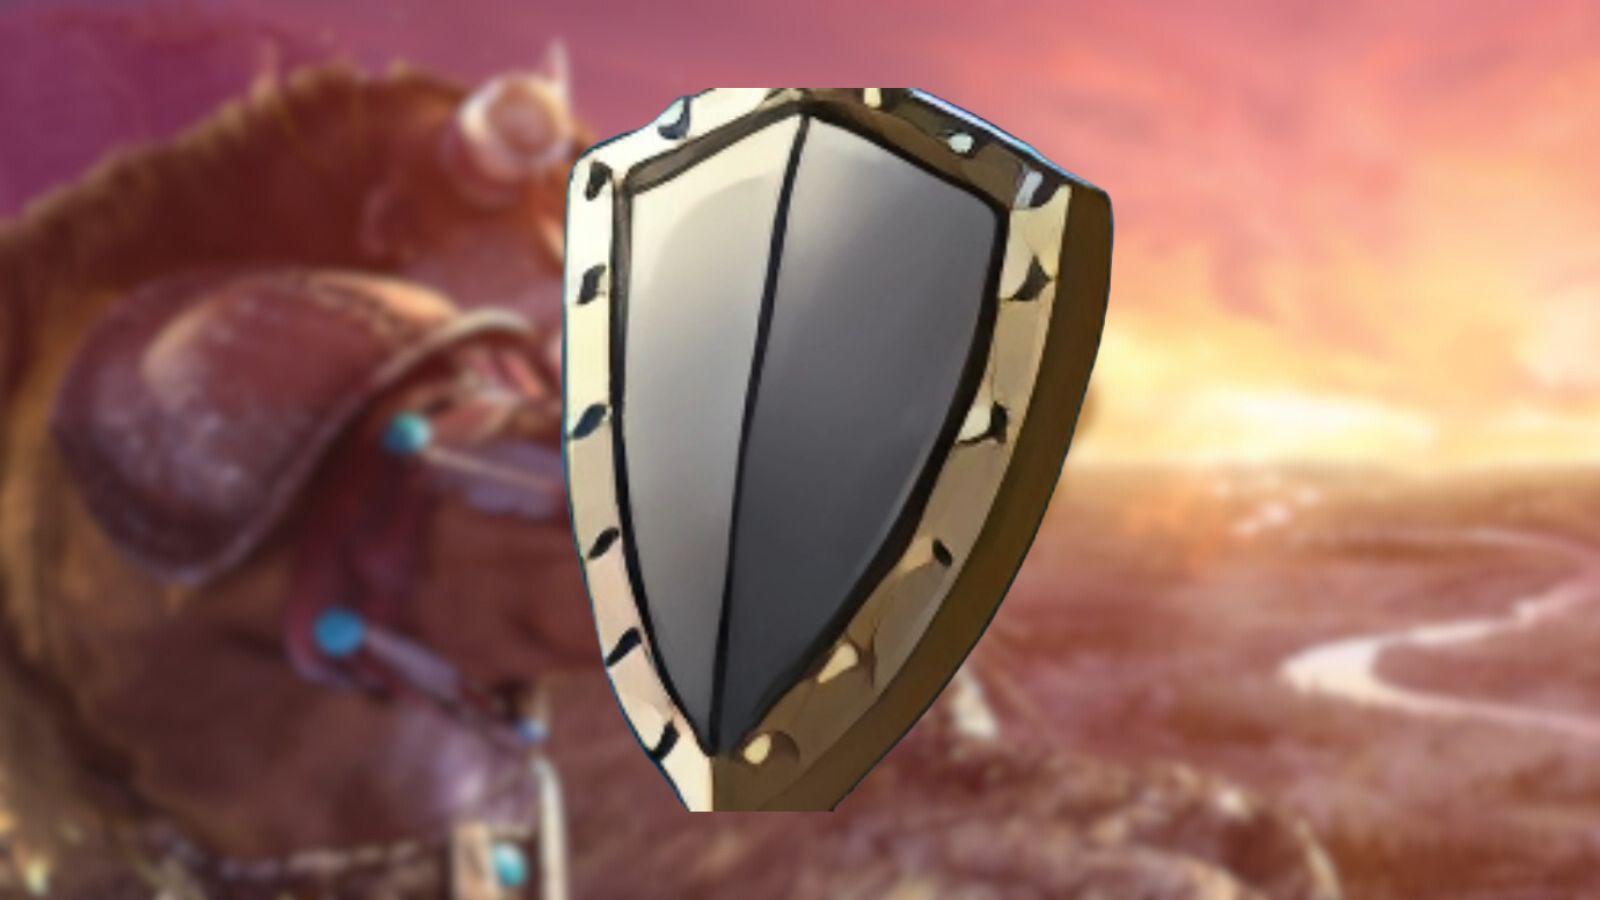 The WoW Tank shield on a Tauren background in Season of Discovery